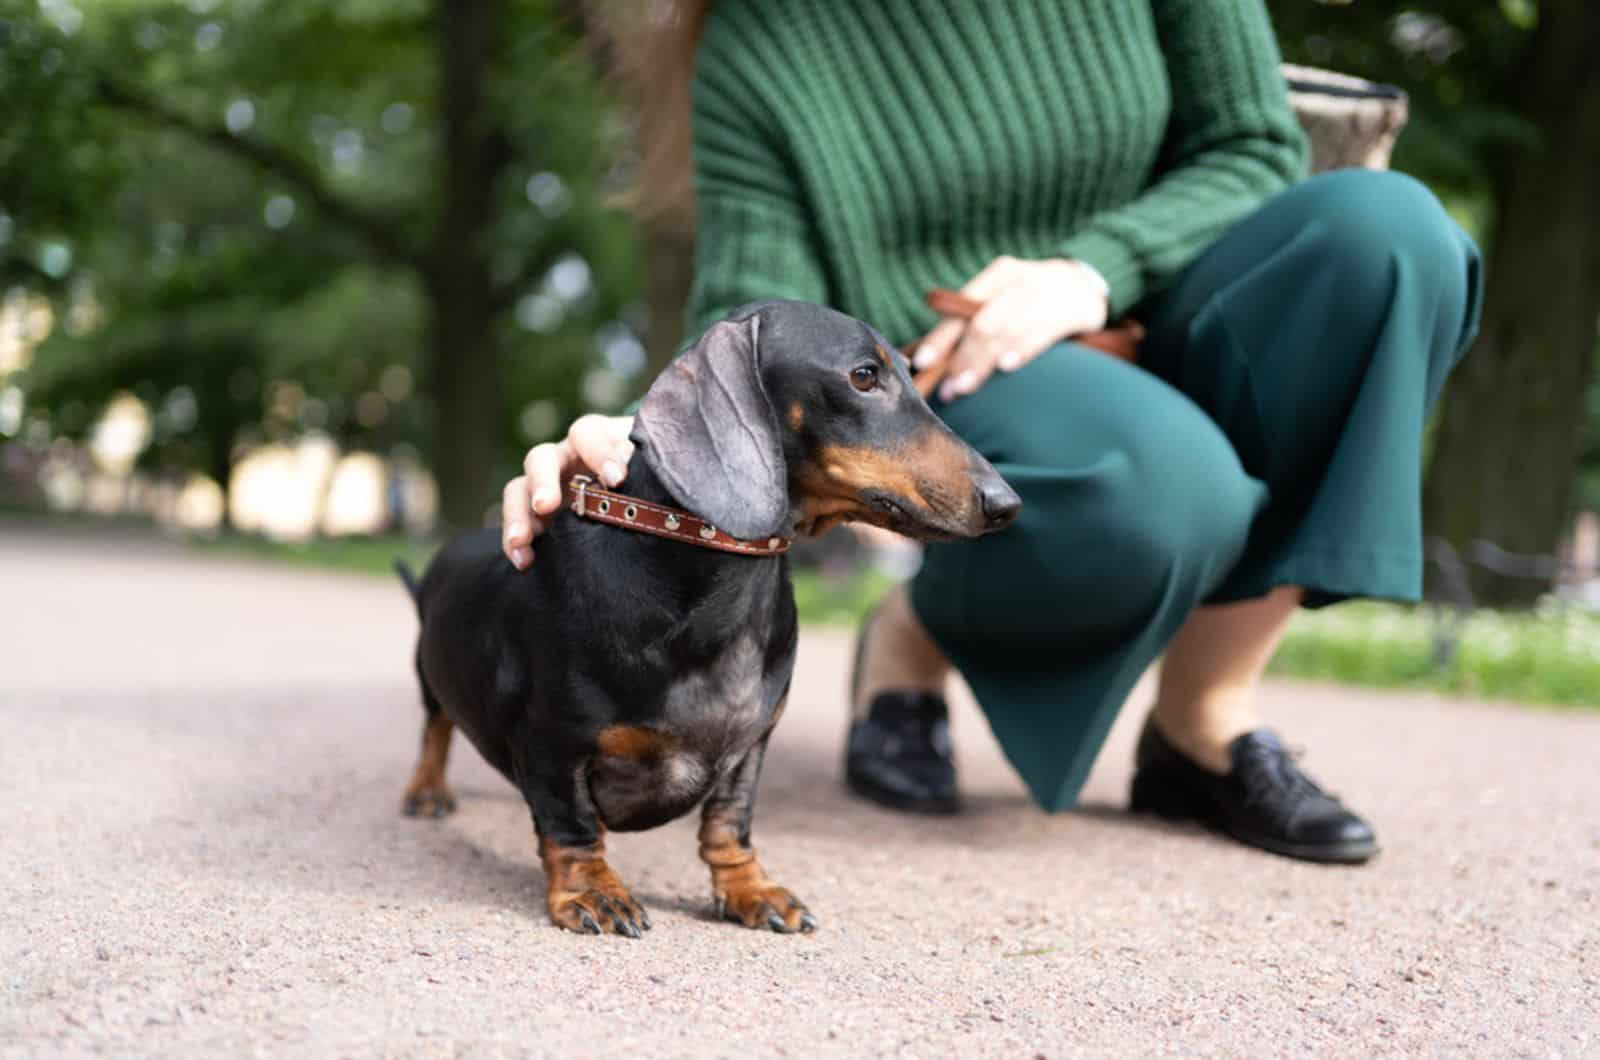 dachshund dog and his owner in a walk